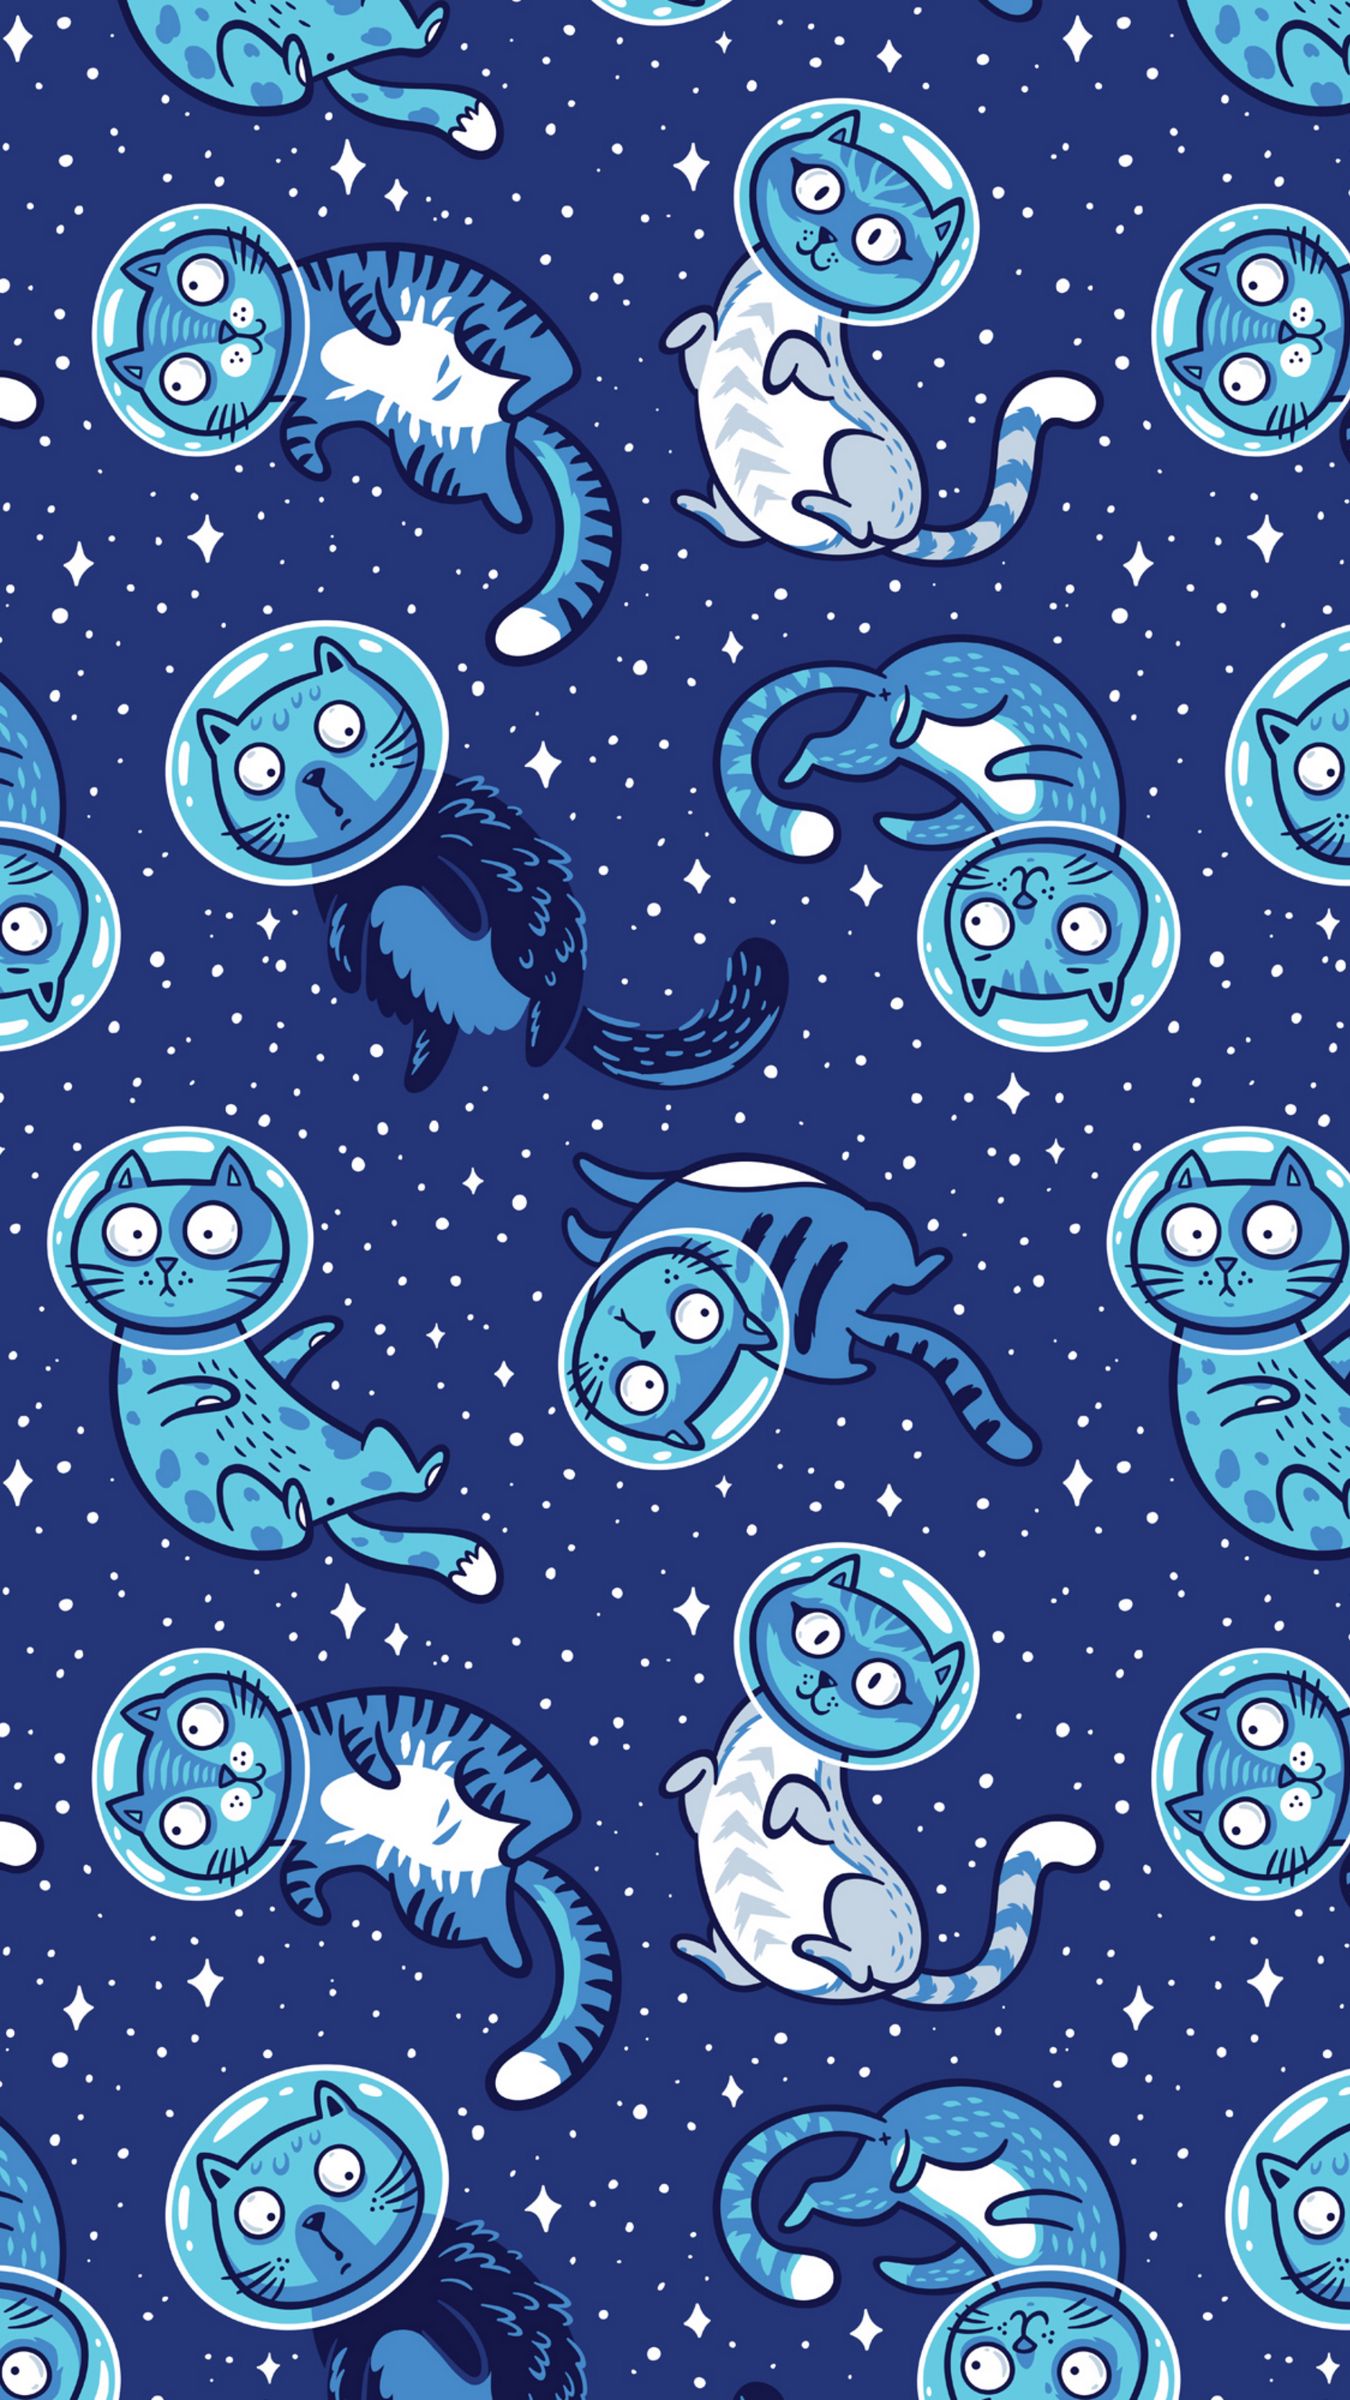 space cats wallpaper iphone